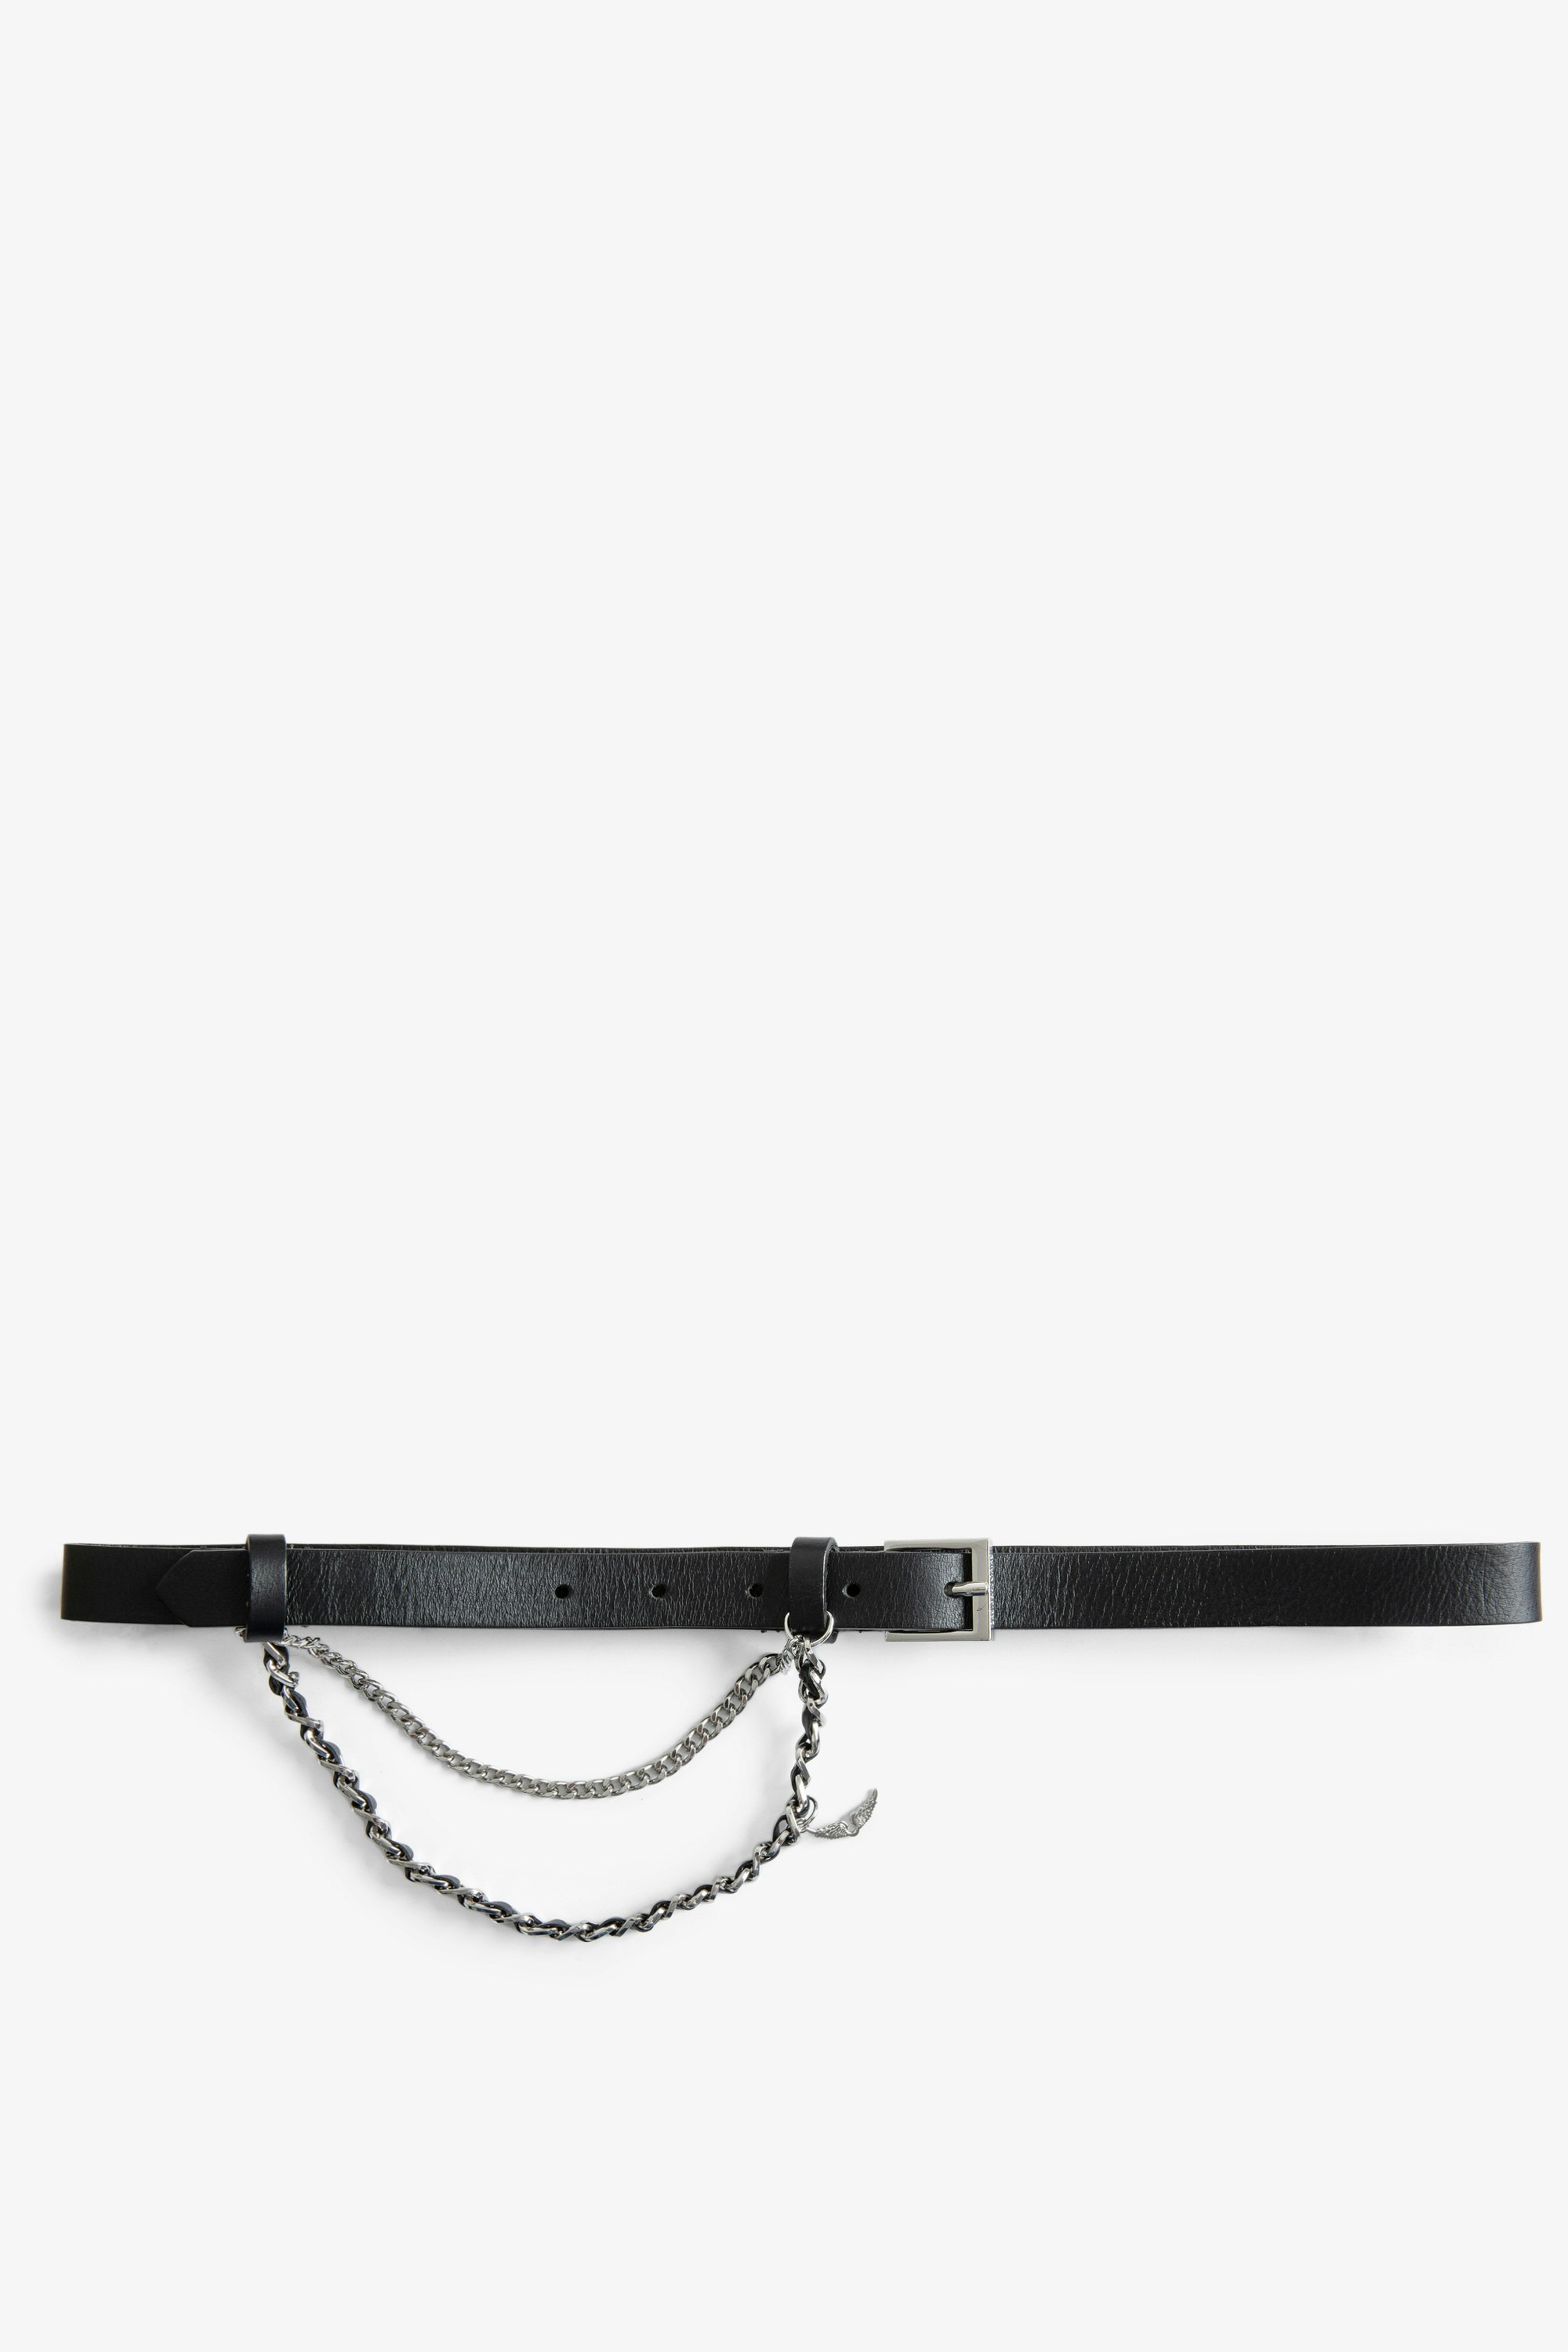 Rock Chain Belt Woman’s Zadig&Voltaire black leather belt with silver chain.